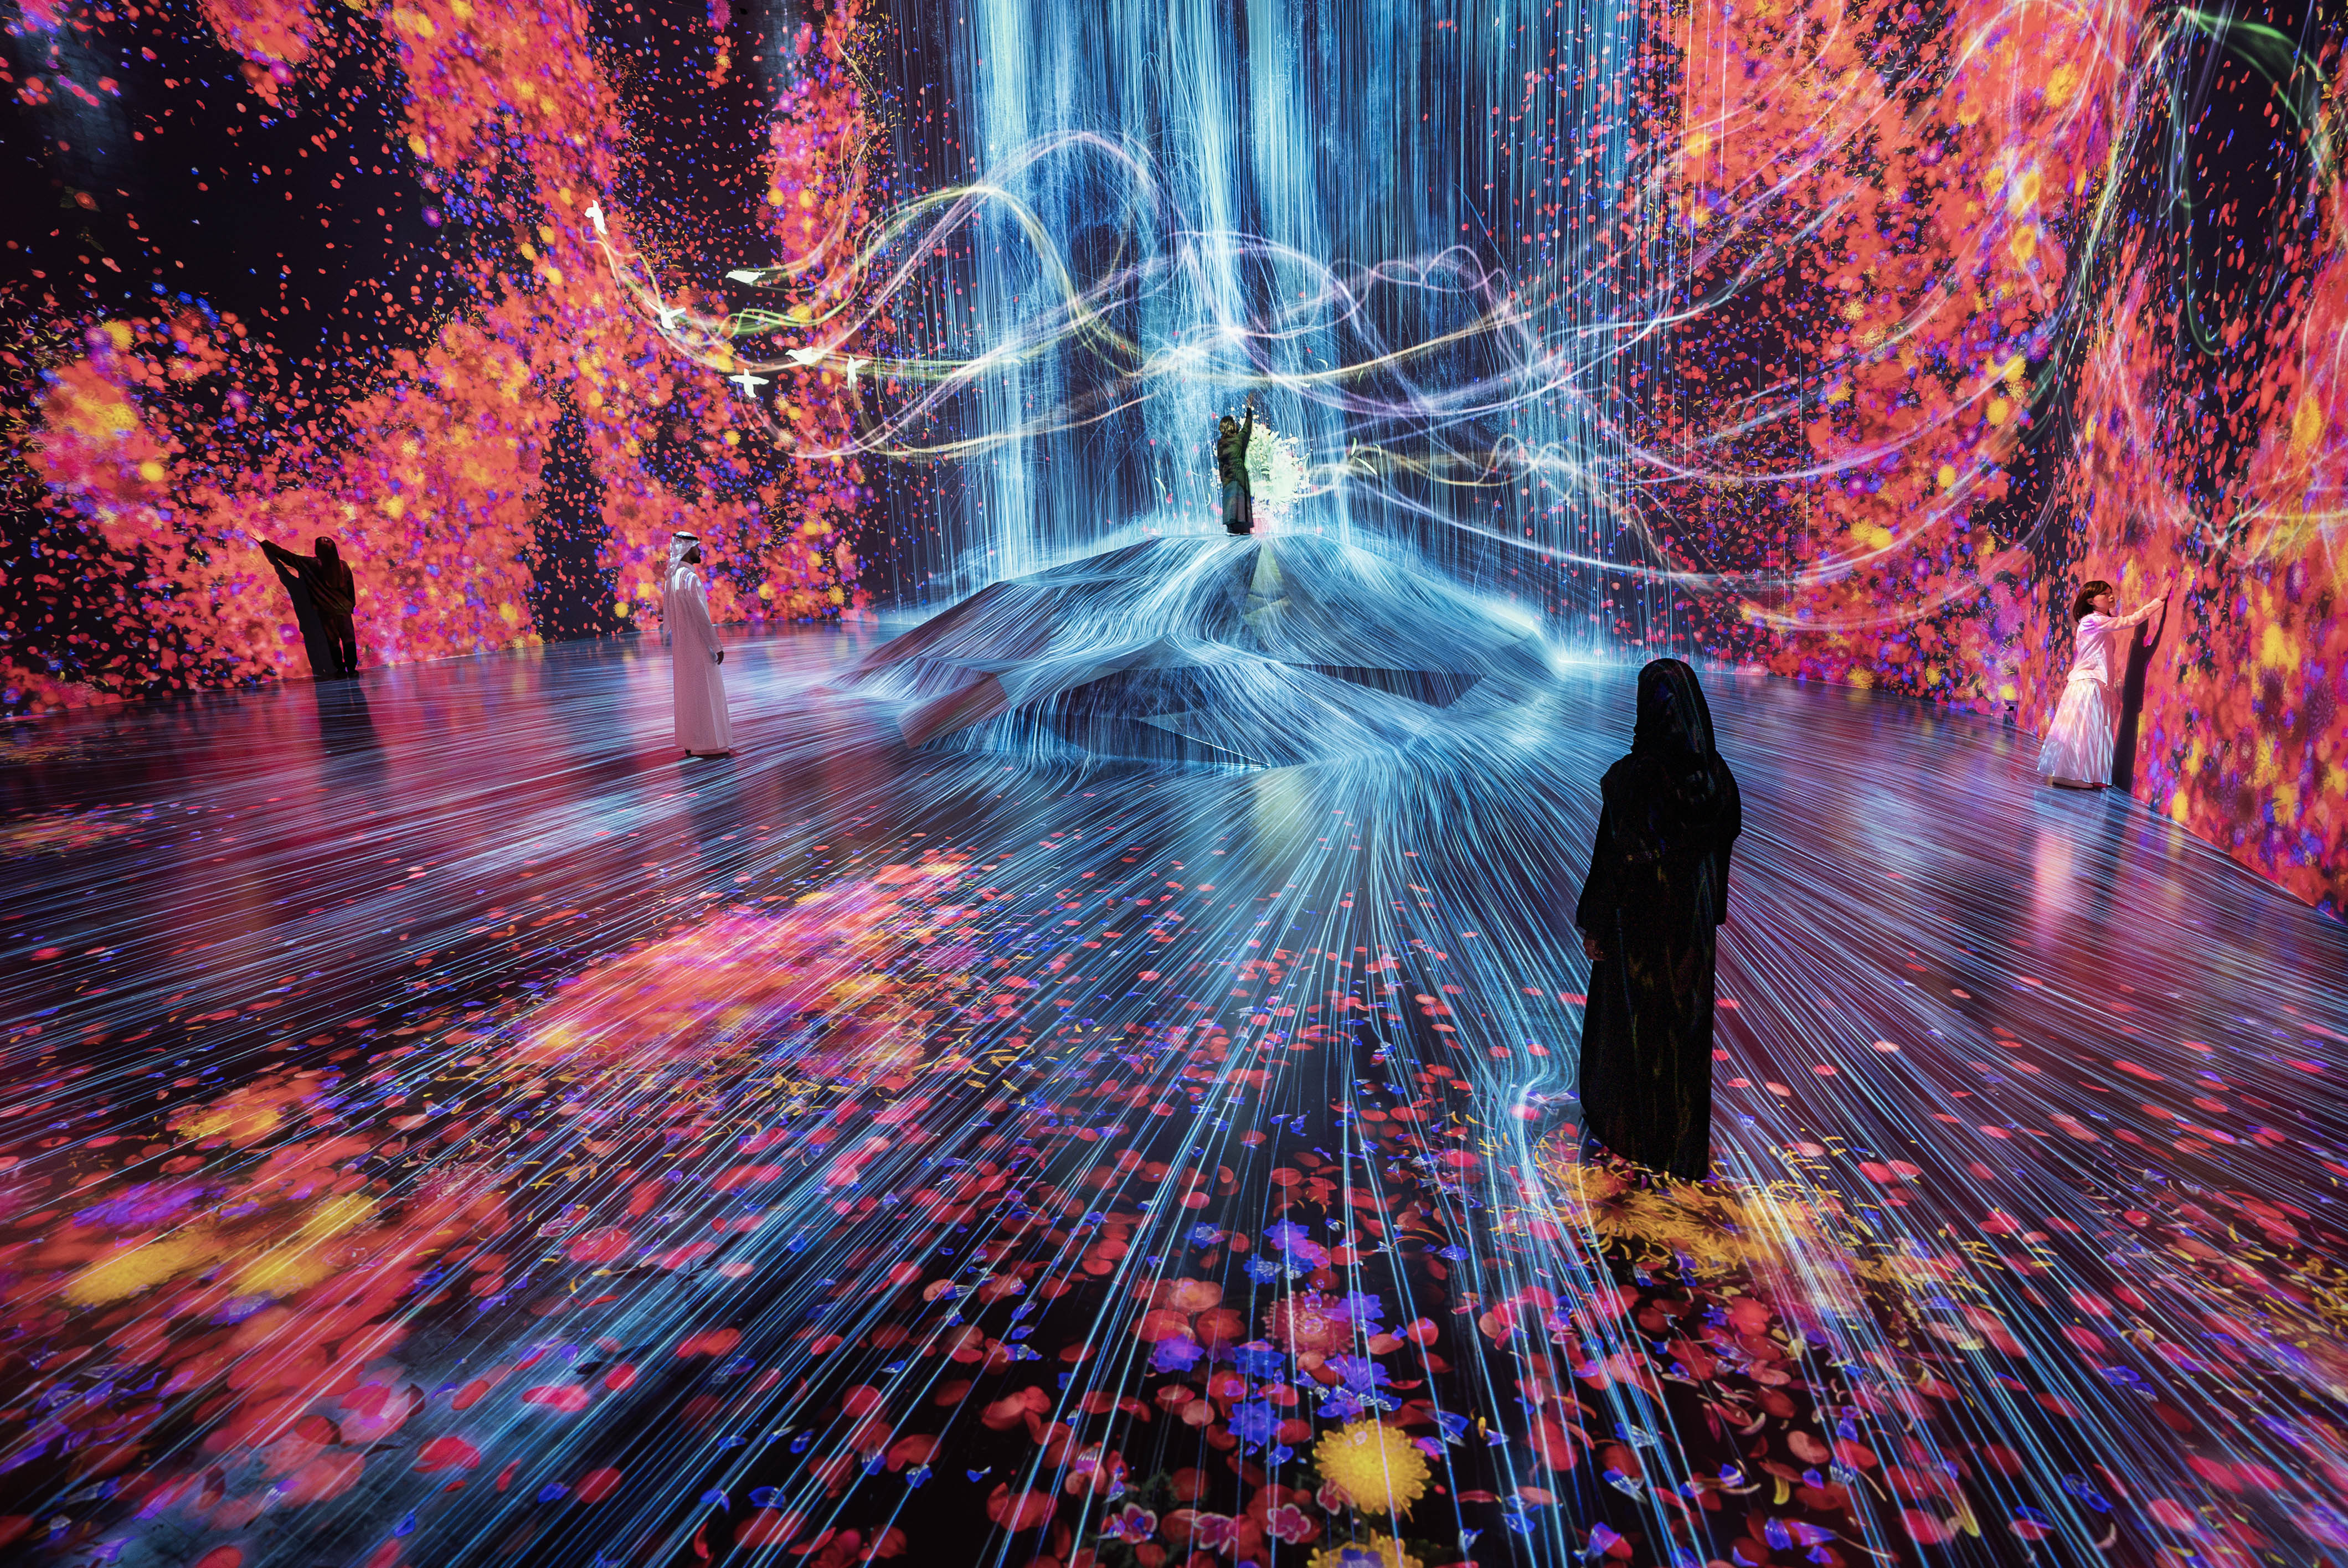 teamLab Borderless, a museum without a map, comprises over 80 artworks that transcend boundaries, eternally transforming the scenery and forming one borderless world. Now open in Jeddah Historic District. (Highlight video of teamLab Borderless Jeddah / Video: teamLab)